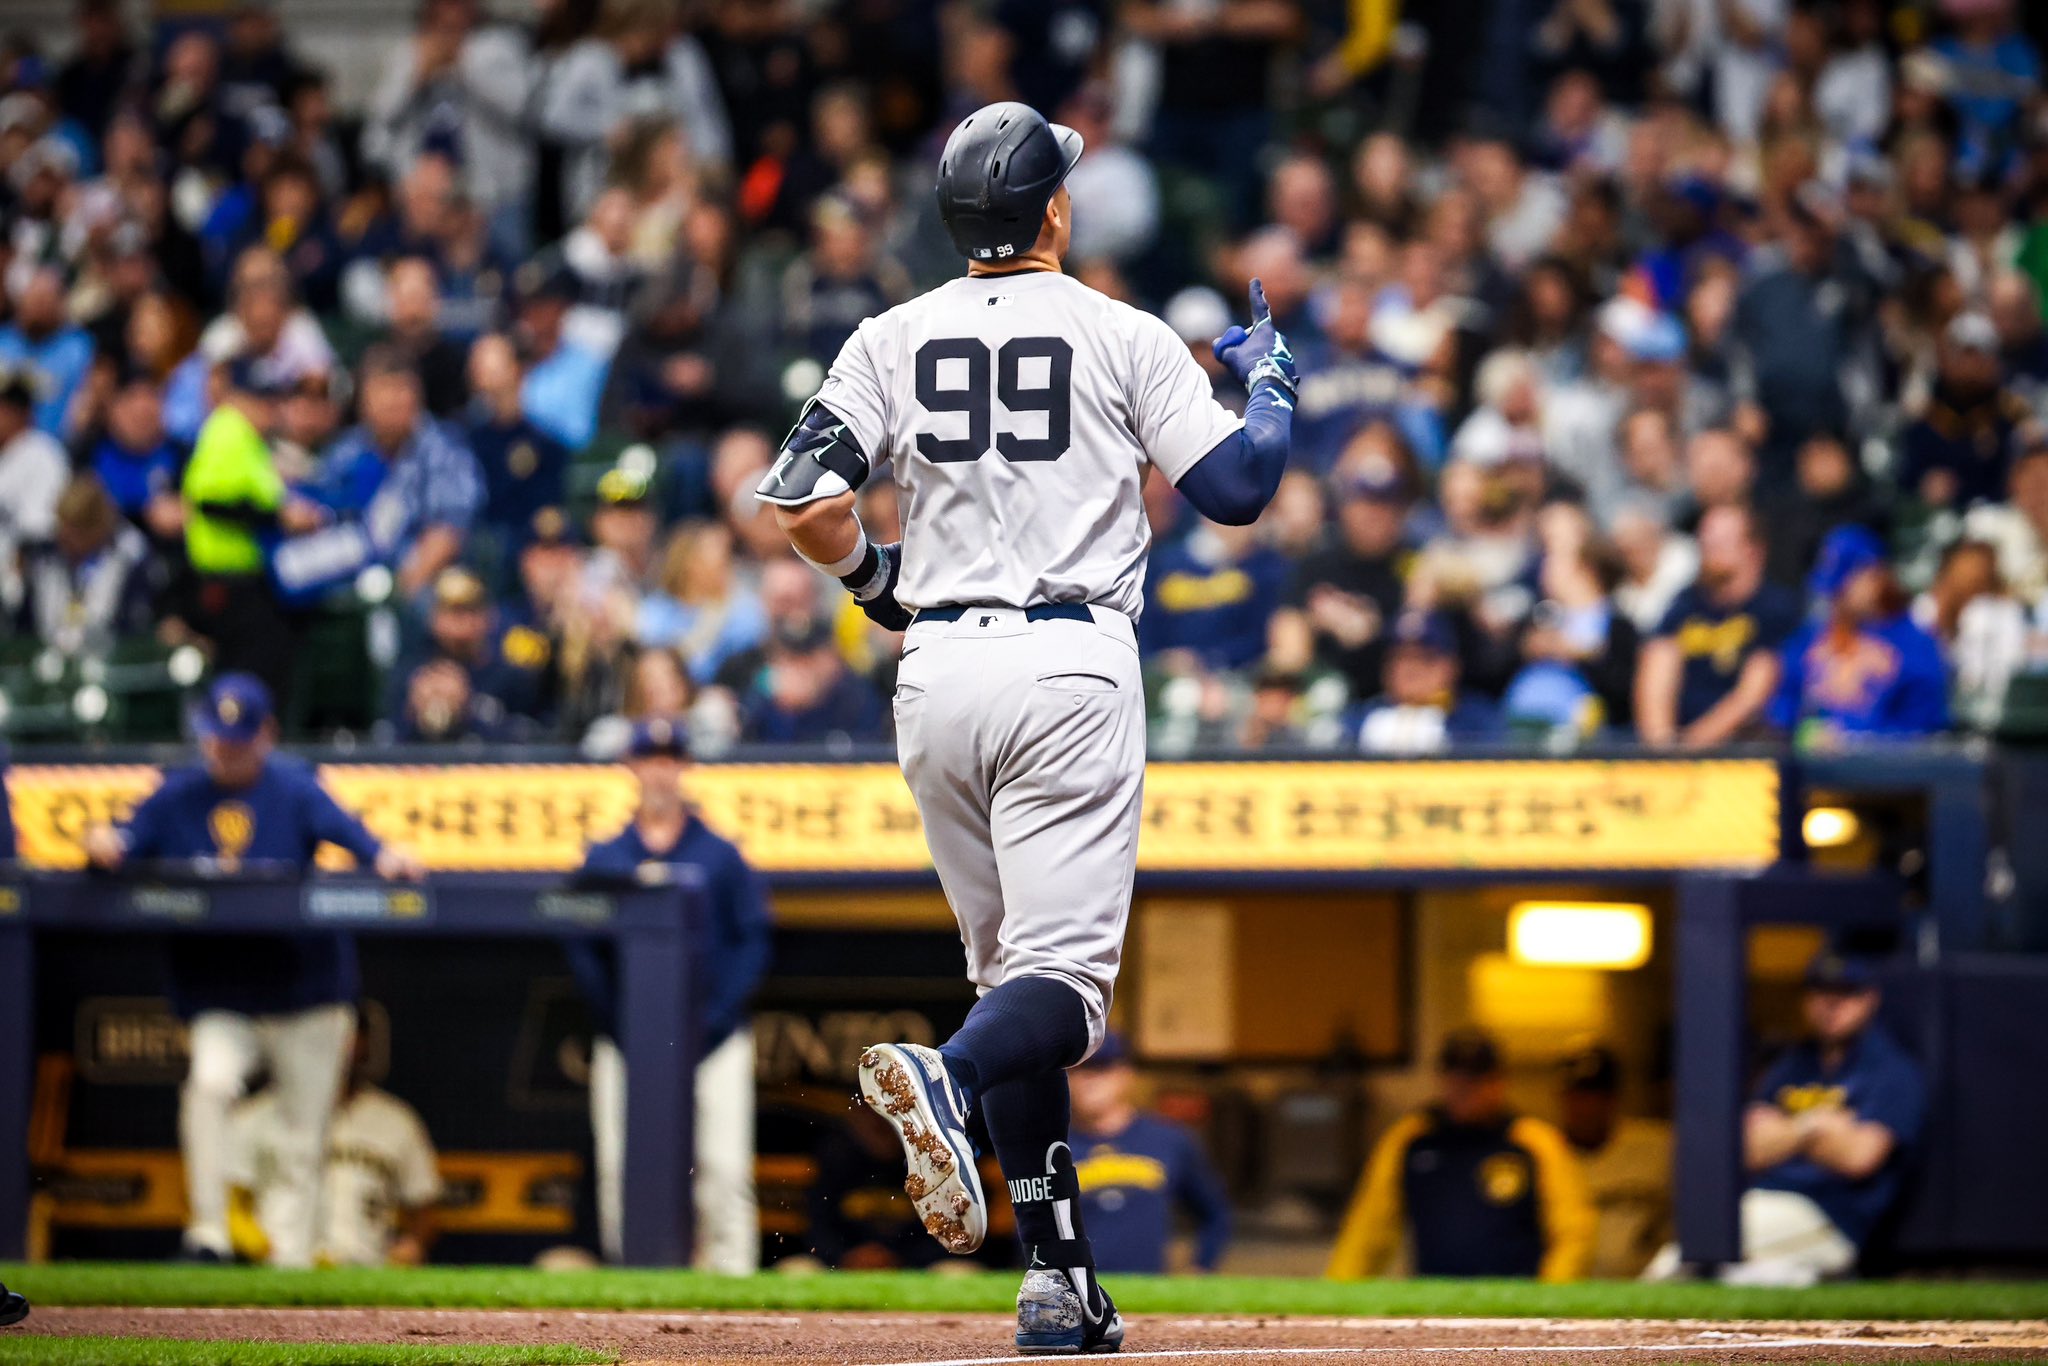 Yankees Offense Ignites: Second Straight Blowout Win Over Brewers